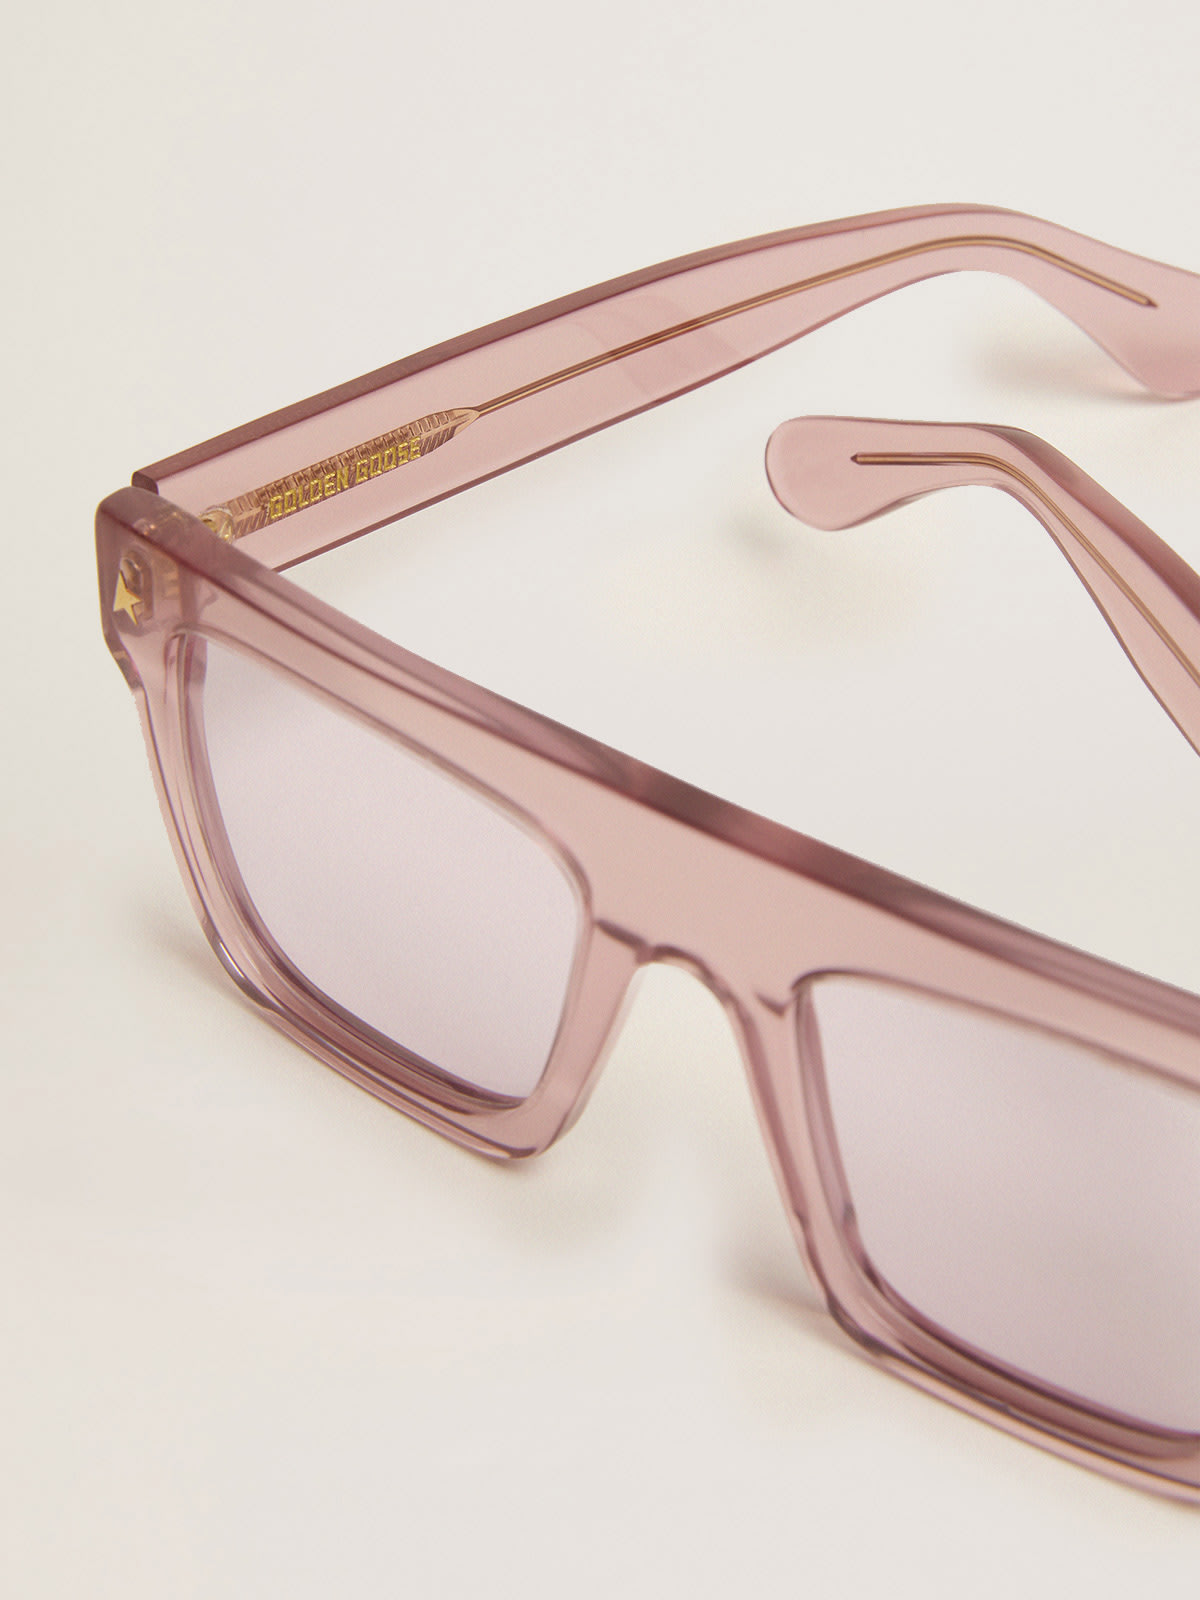 Golden Goose - Square-style Sunframe Jamie with clear pink frame and pink lenses in 